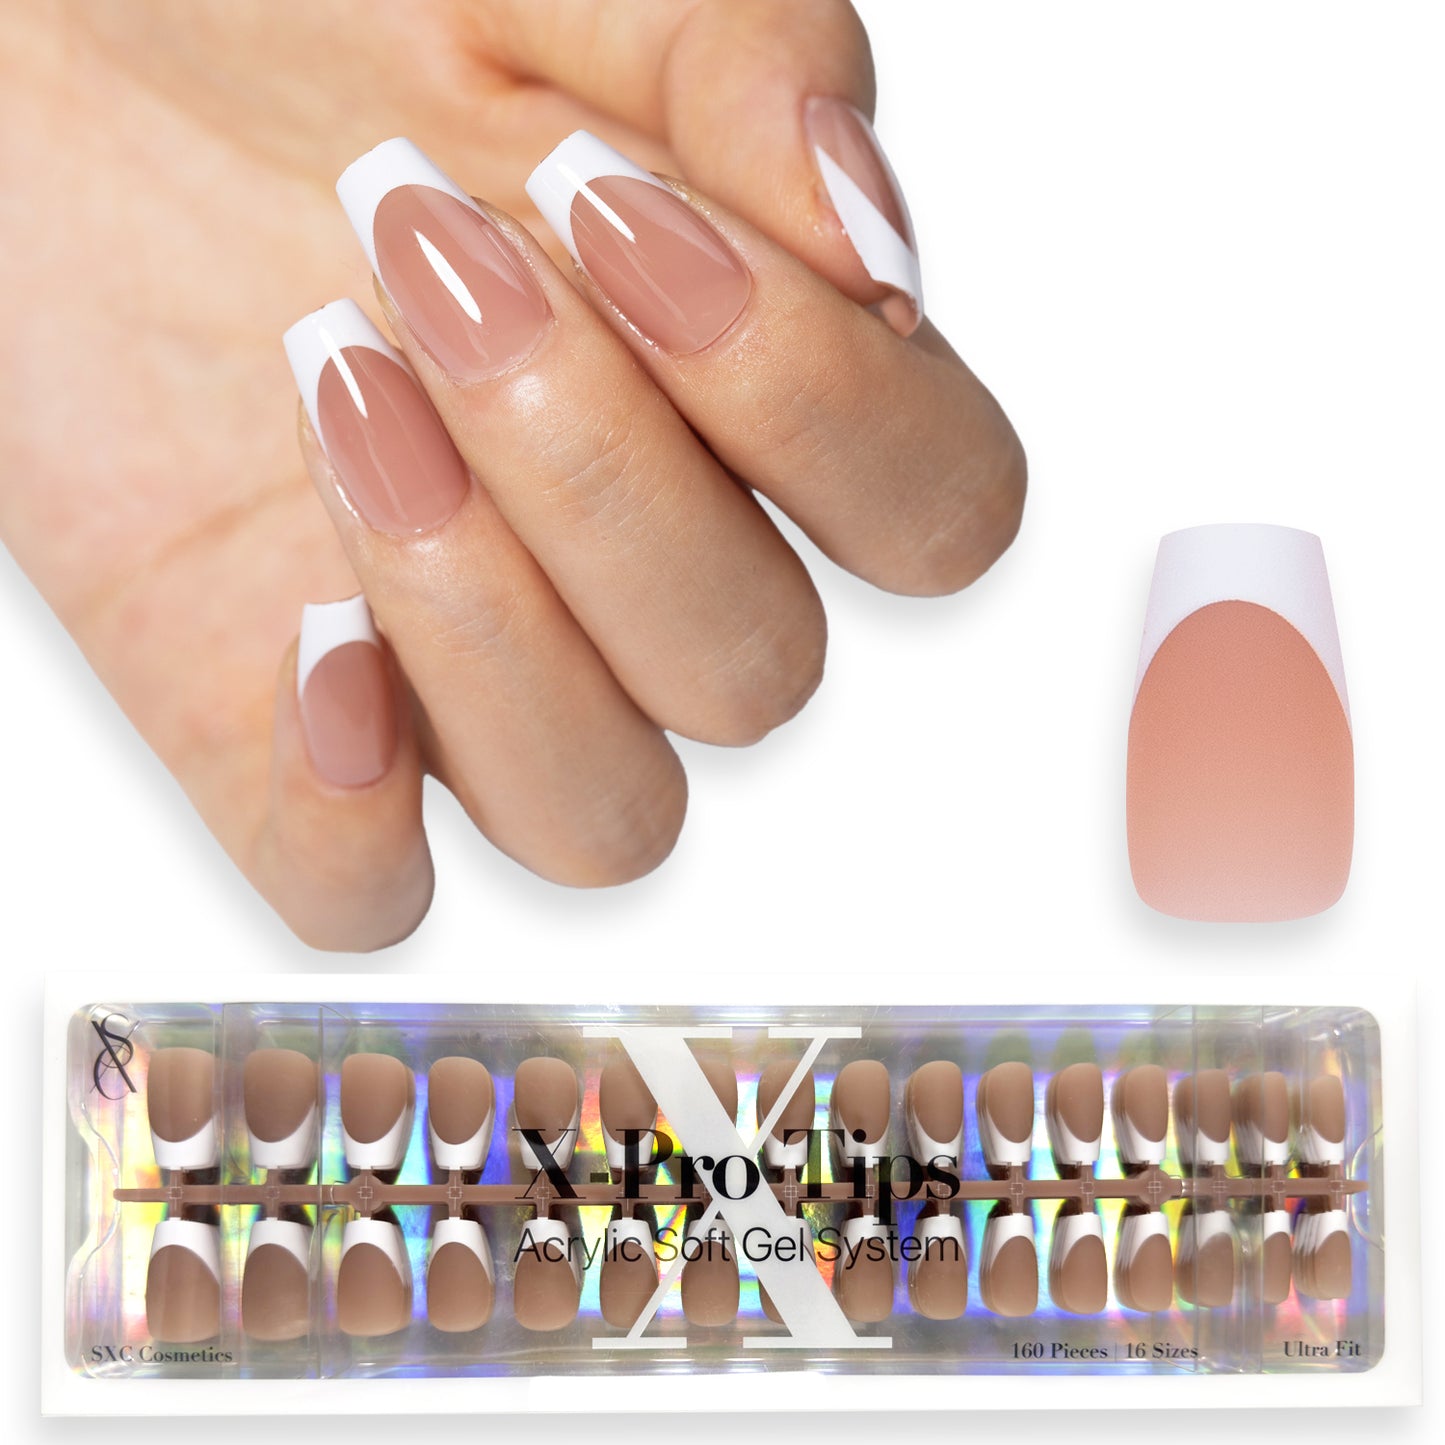 SXC Cosmetics X-Pro Tips Press on Nails, Brown Short Coffin French Tips, 160 Pieces in 16 Sizes Ultra Fit Acrylic Soft Gel System